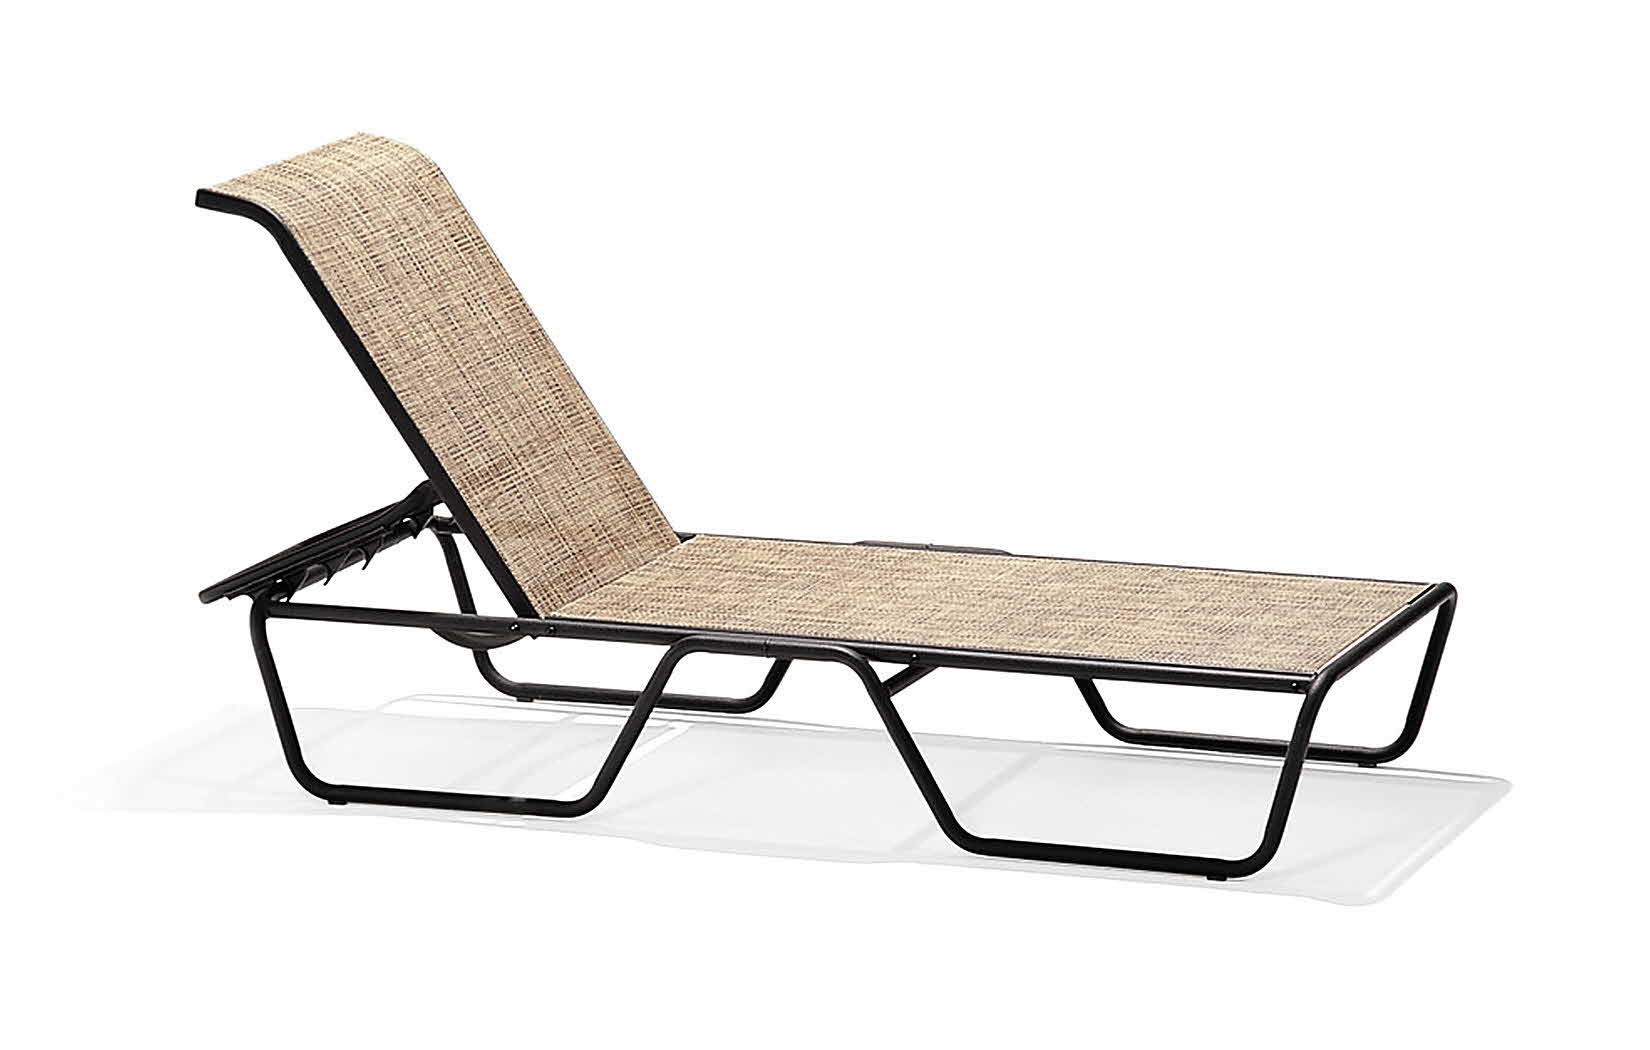 Oasis Sling Stacking Chaise Lounge